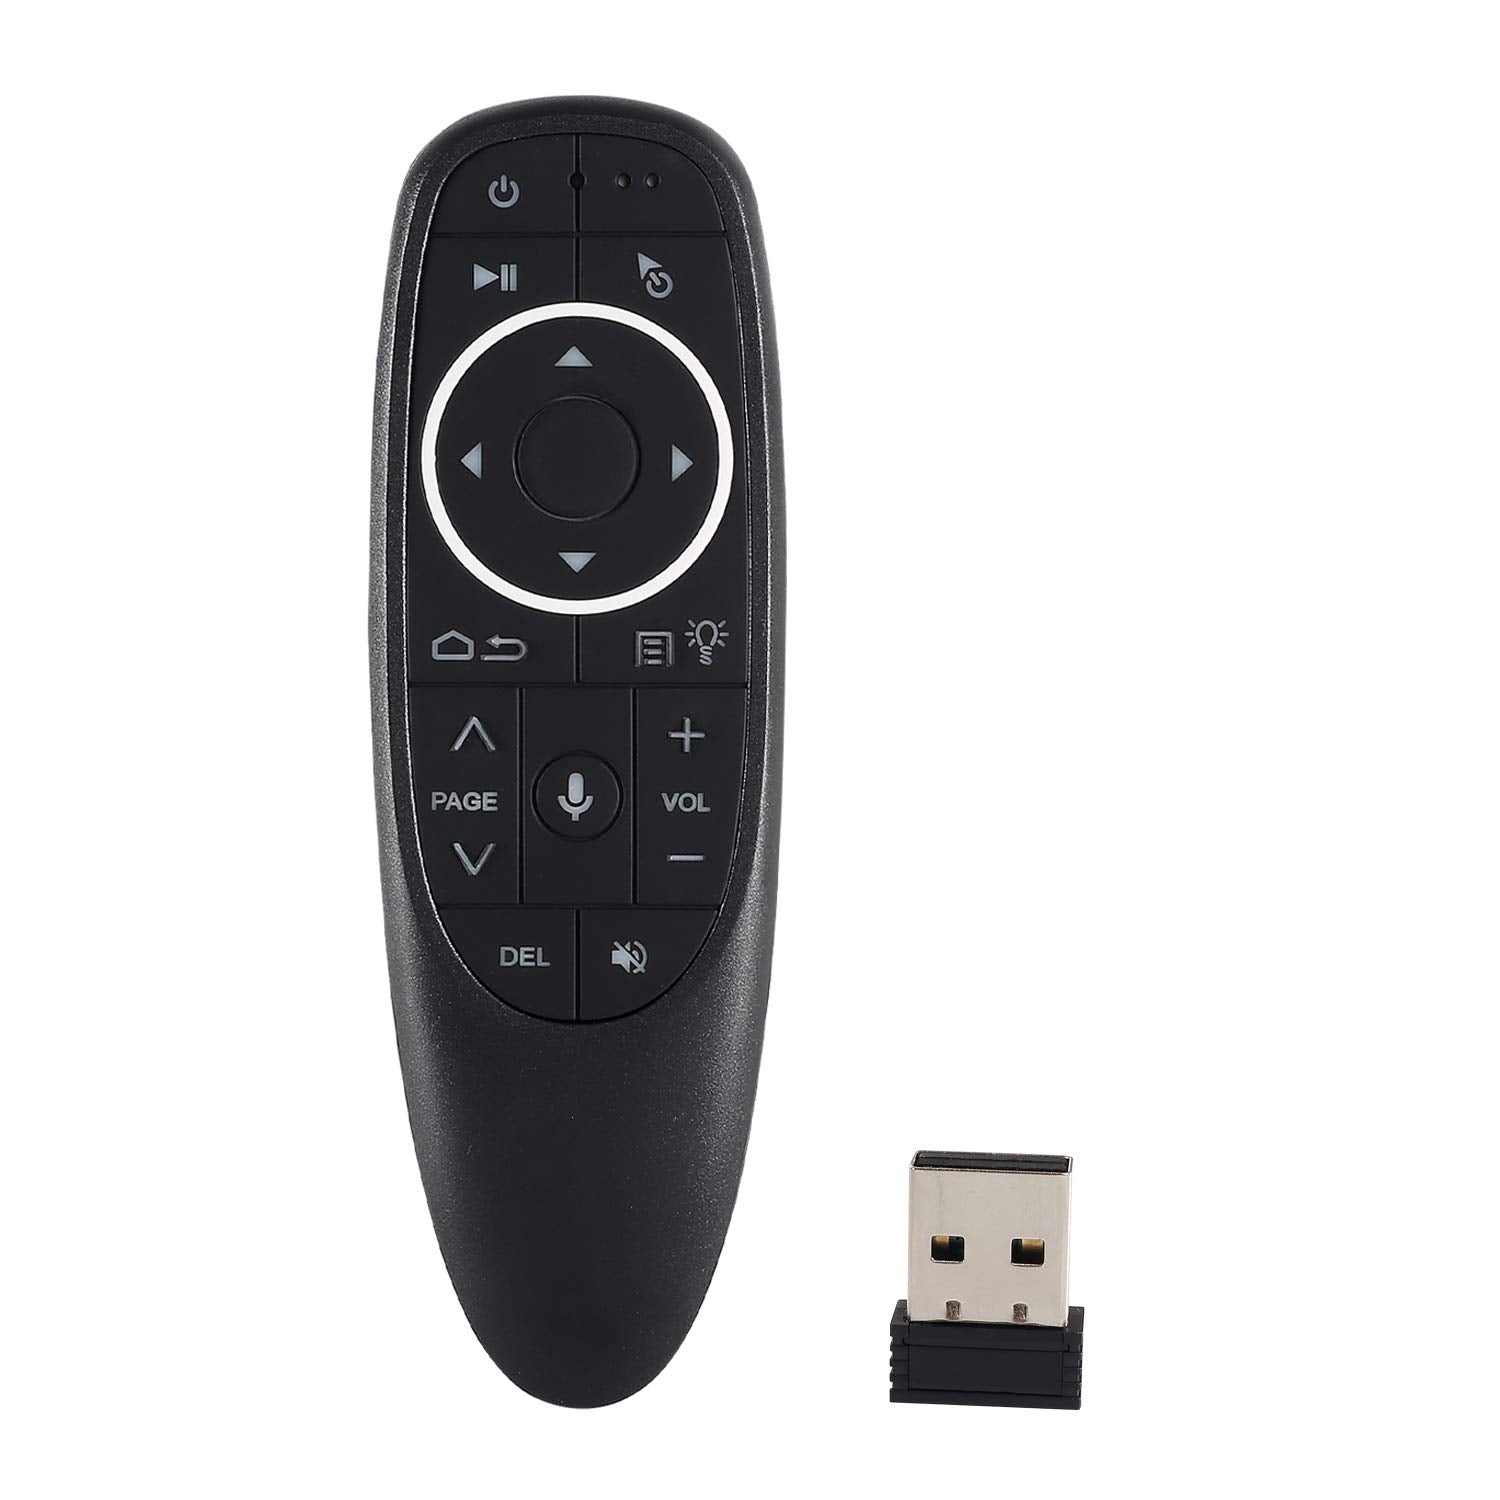 G10s Pro Voice Air Fly Mouse with Backlight, 2.4G